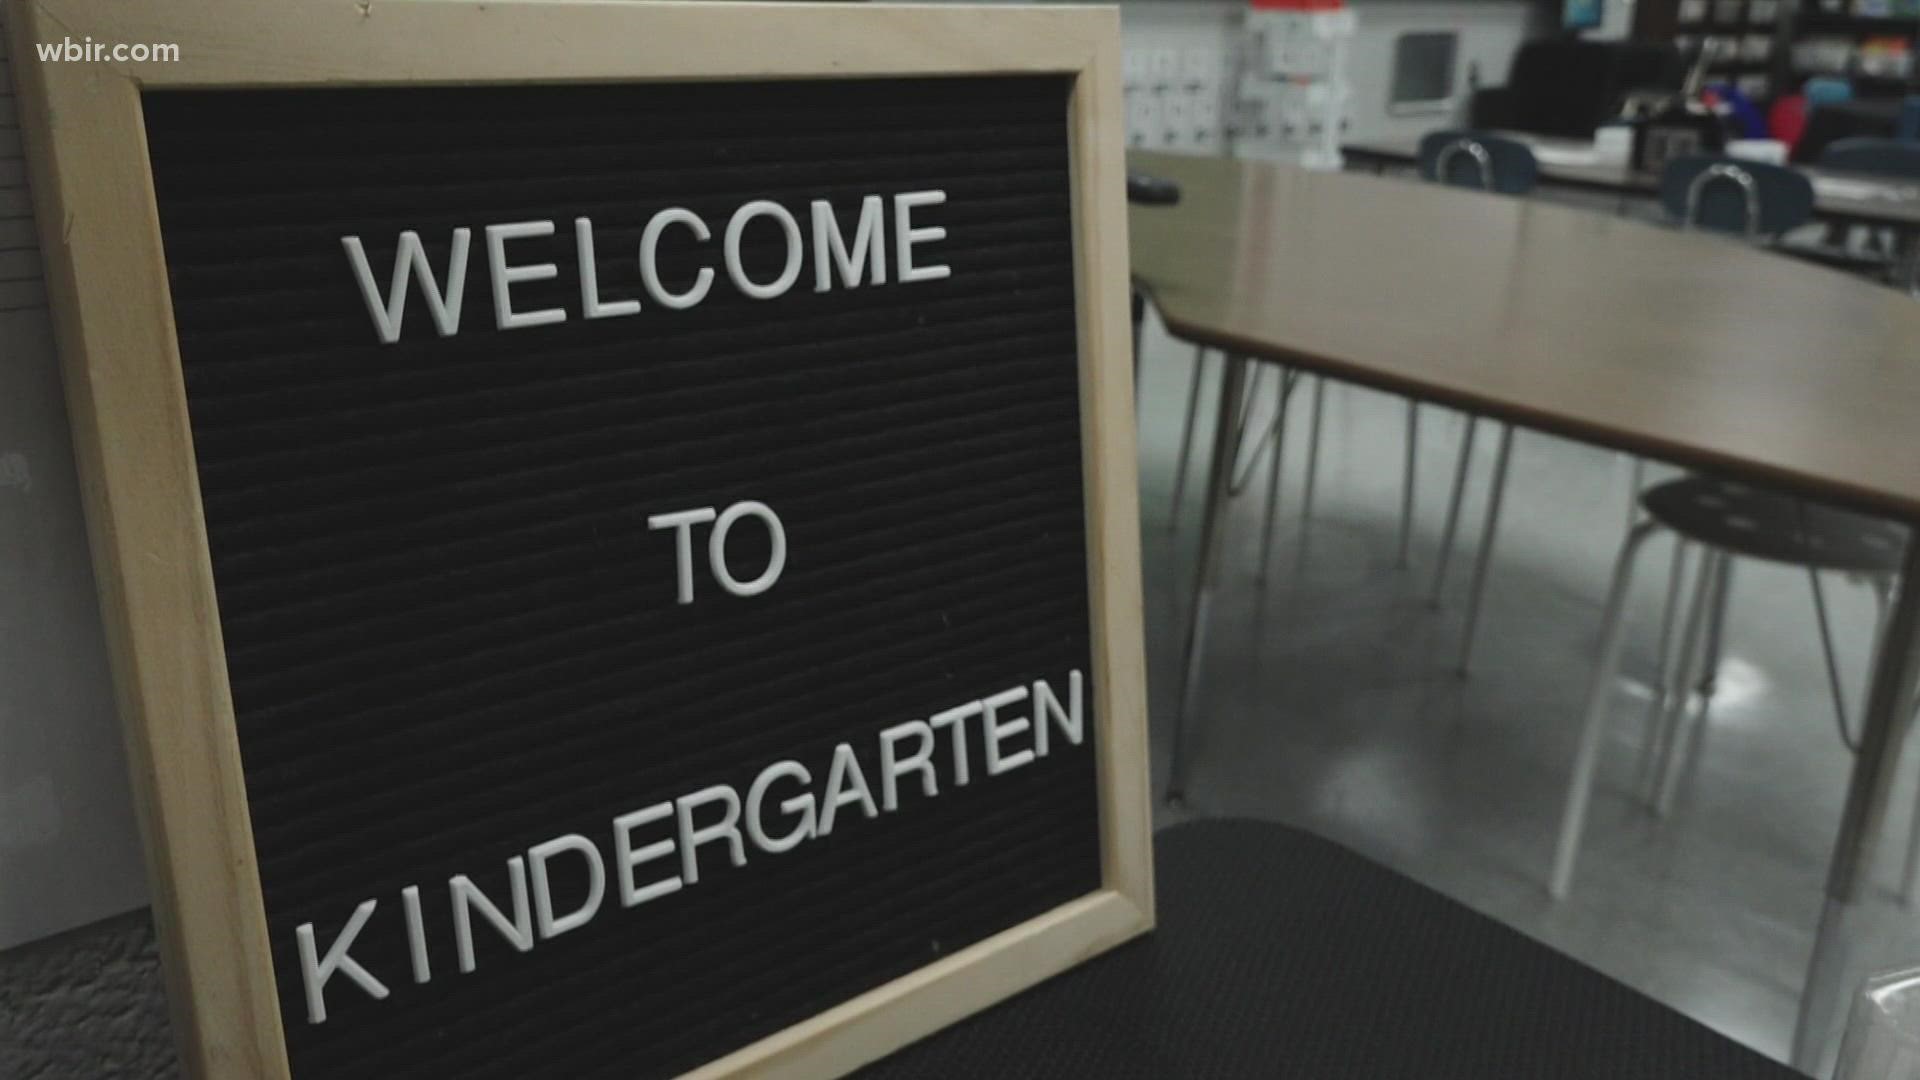 With kids back in school across East Tennessee, many parents had to make the decision if their child should start kindergarten, and it's a tough one.